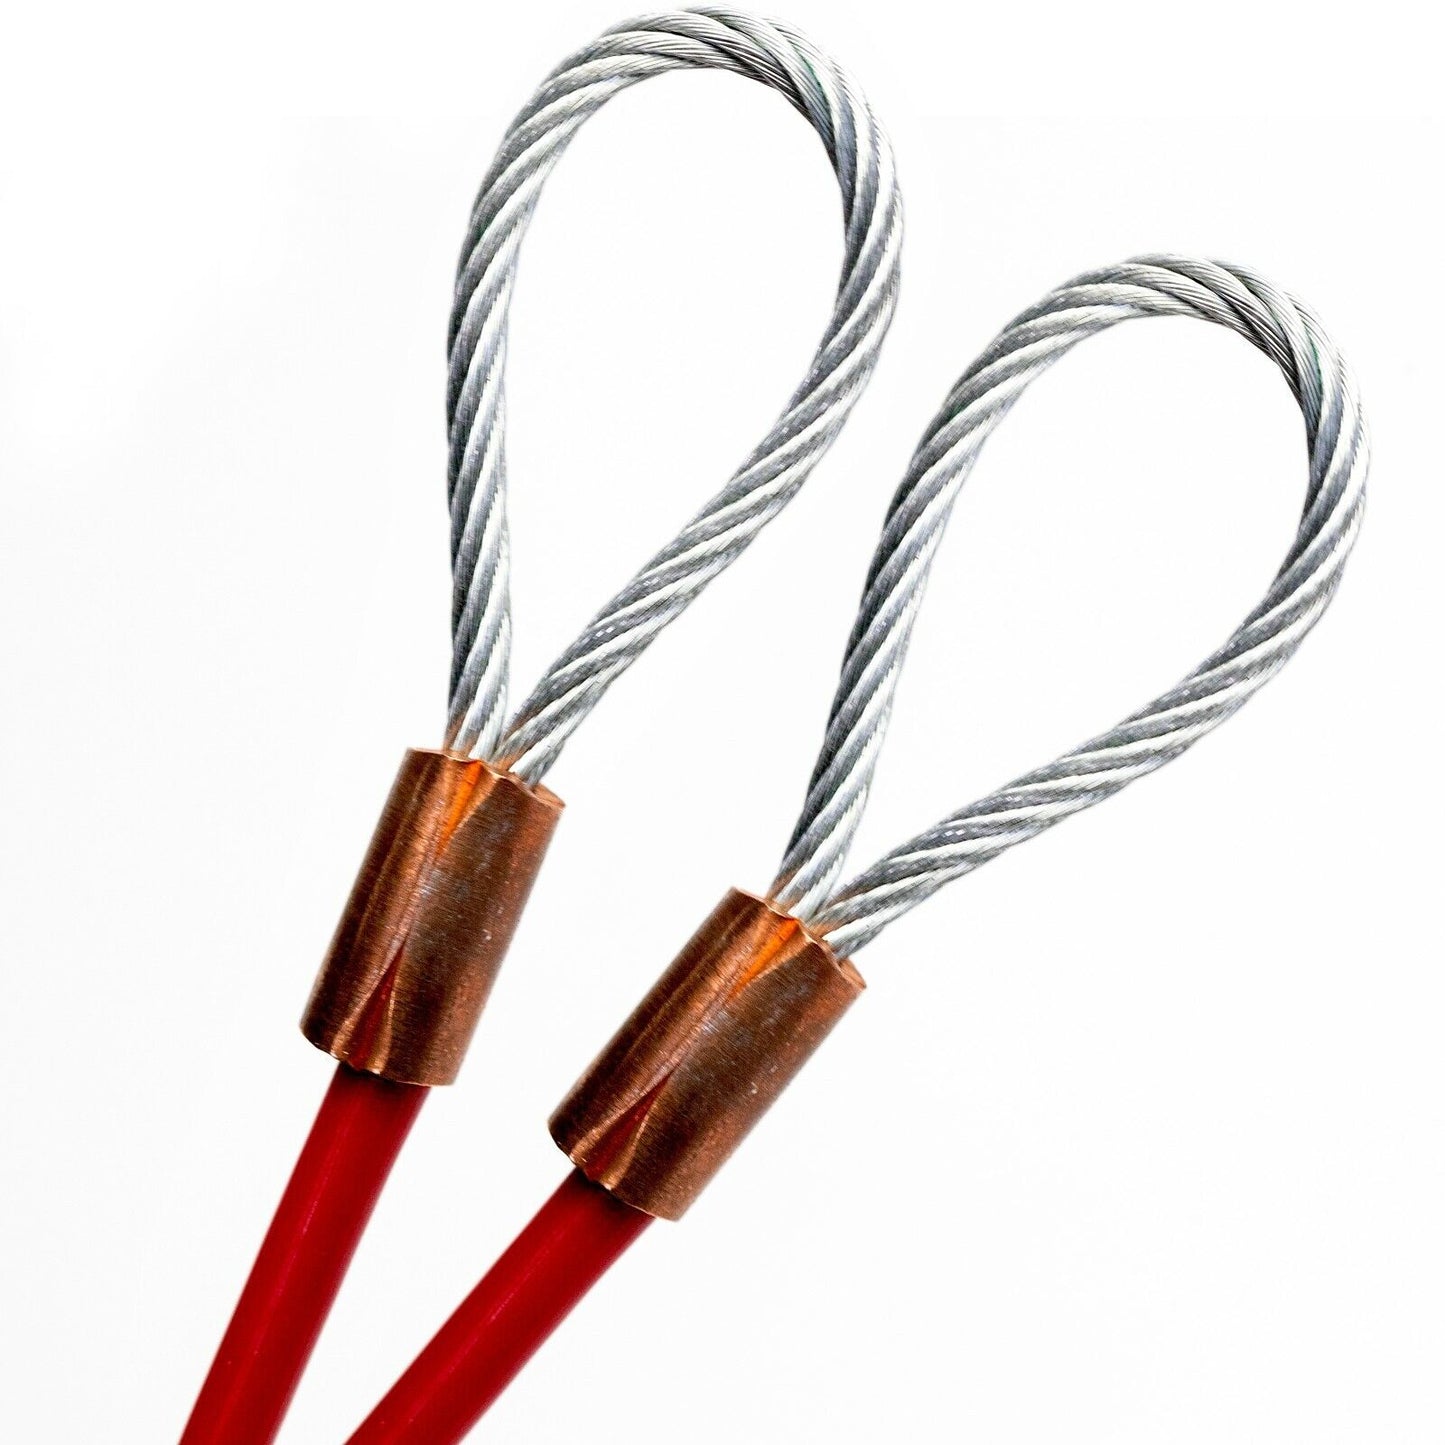 1-100ft Cut To Size 1/4 Galvanized Steel Cable RED Vinyl Coated To 3/16 With Copper Sleeves MADE IN USA